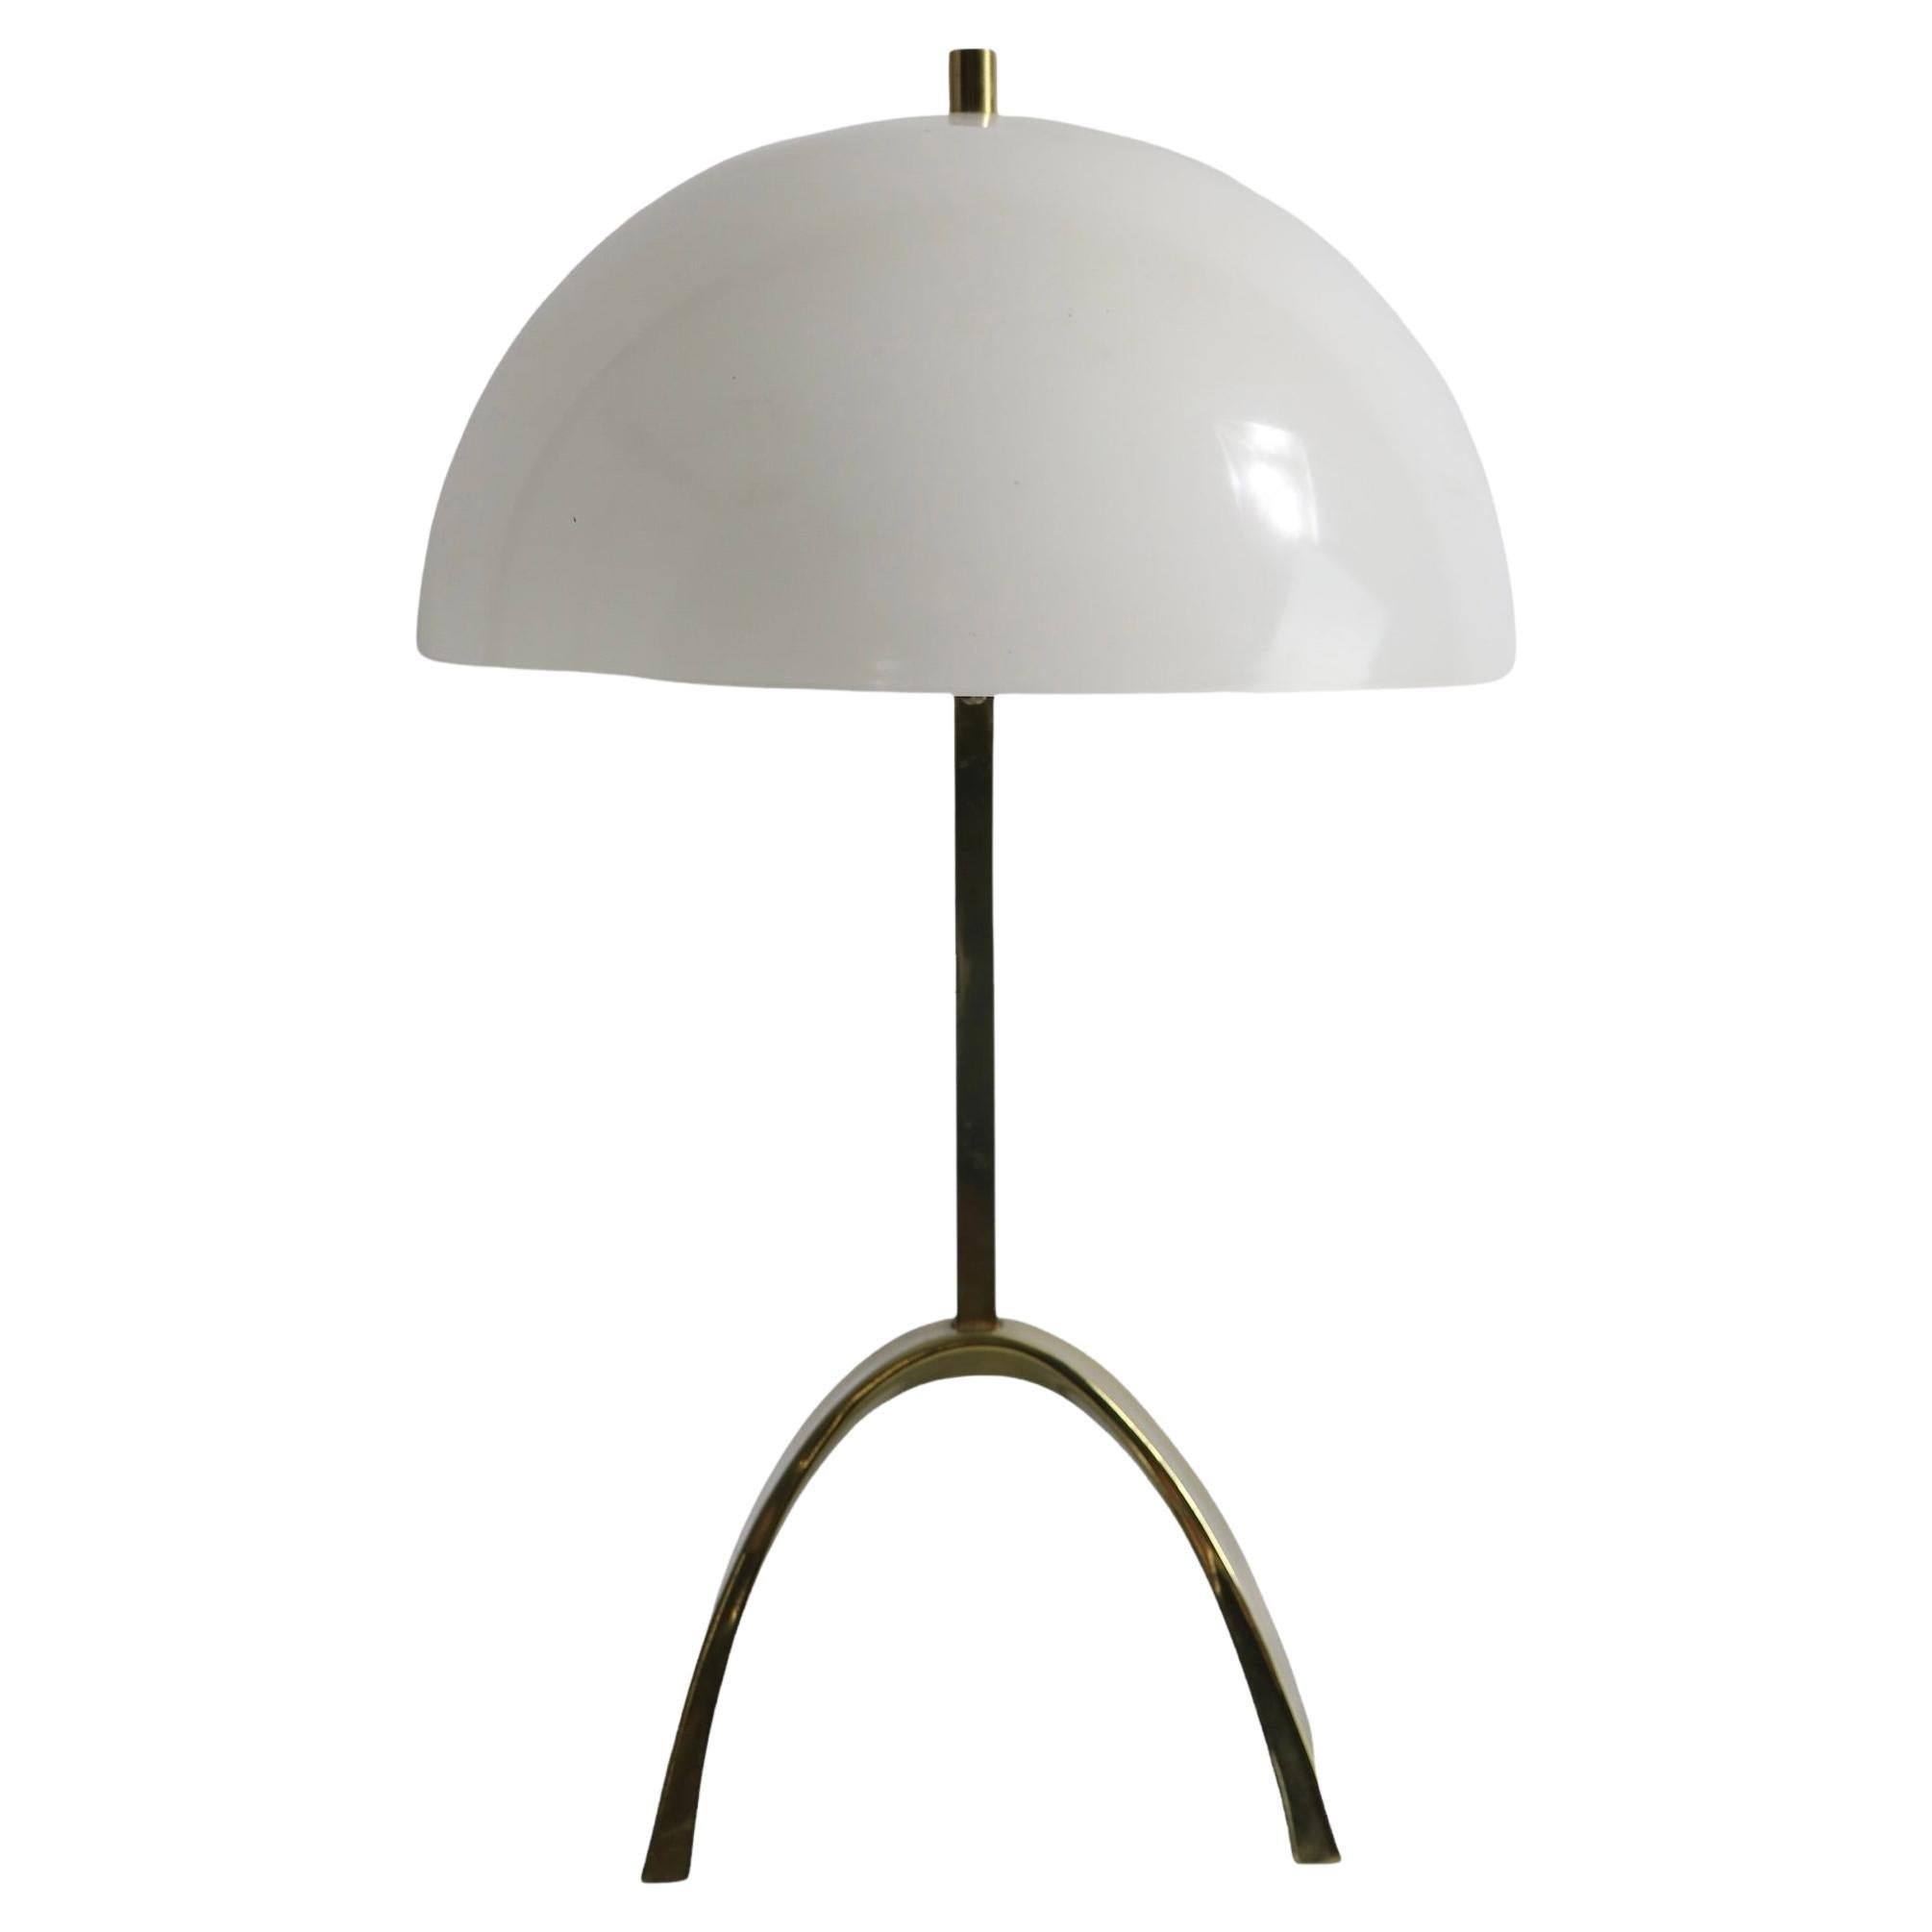 Mod Architectural Brass and Plastic Table Lamp Att. to Thurston for Lightolier